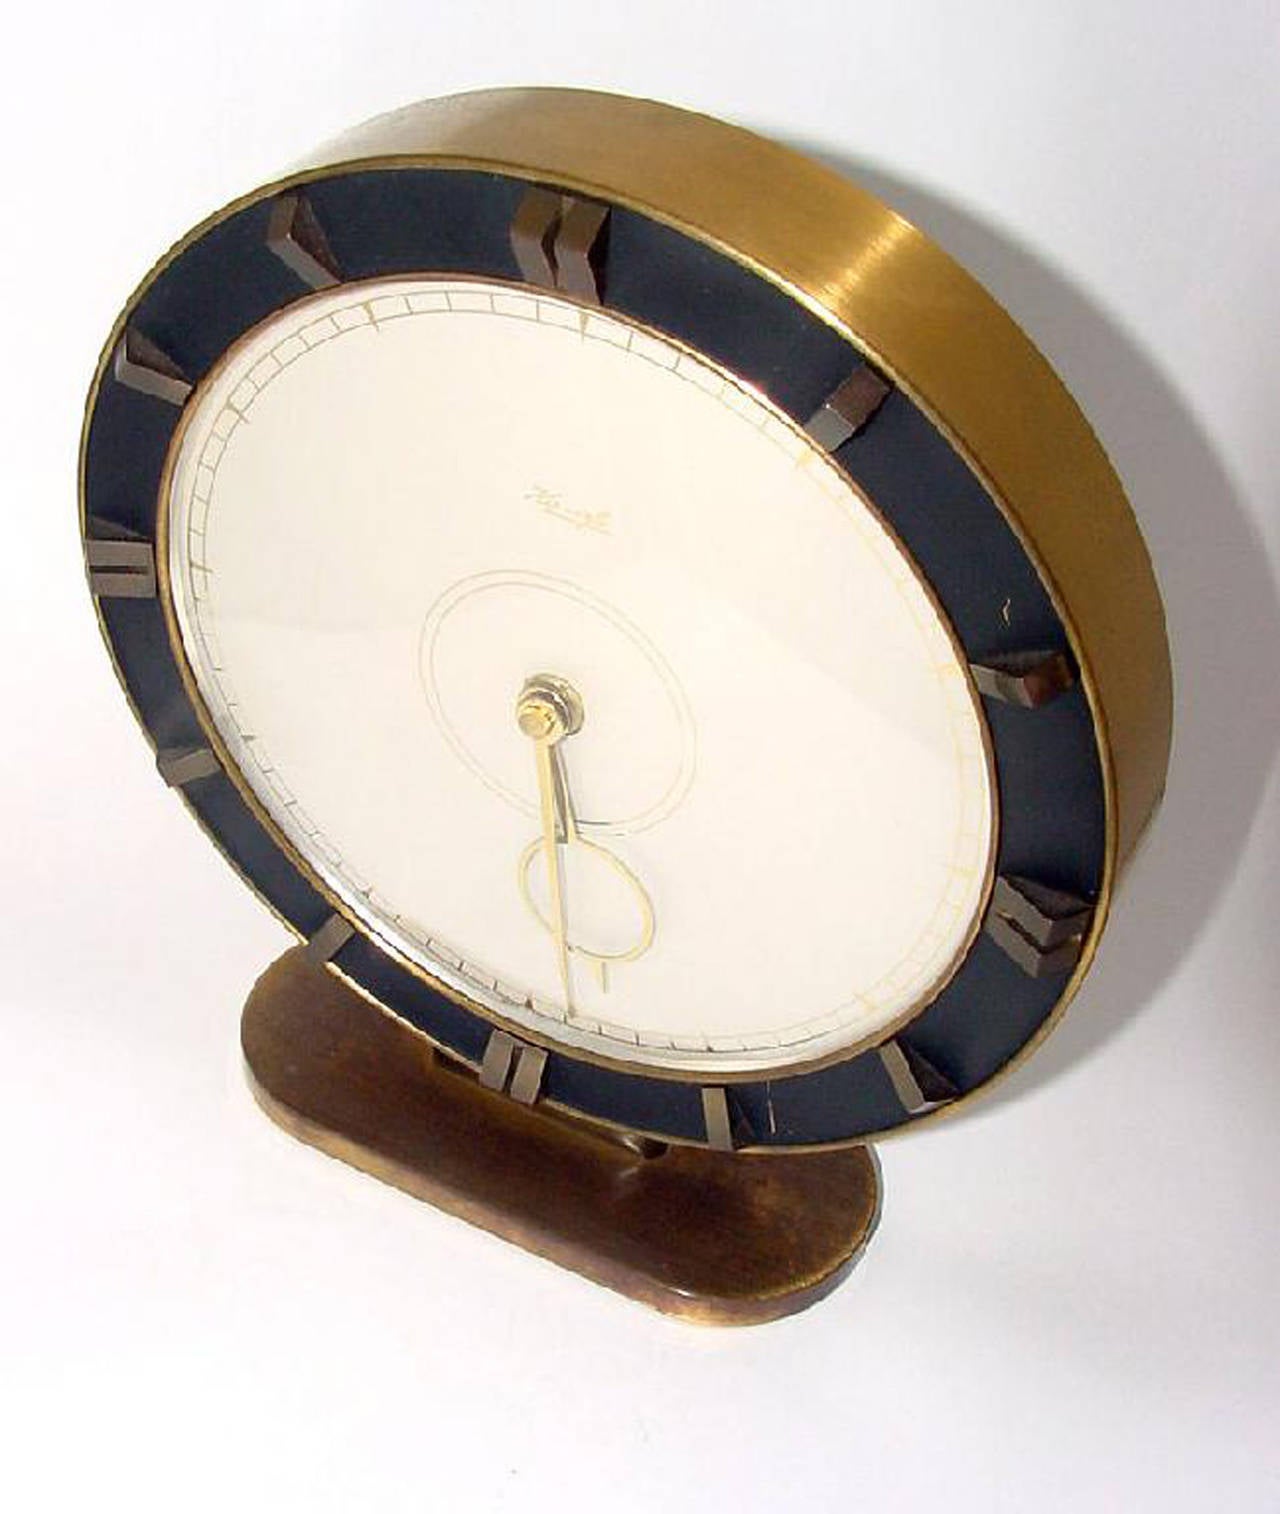 Original movement replaced to a modern quartz movement with a battery. 
The clock is in perfect condition, no major scratches, no glass scratched.
Glass cover,